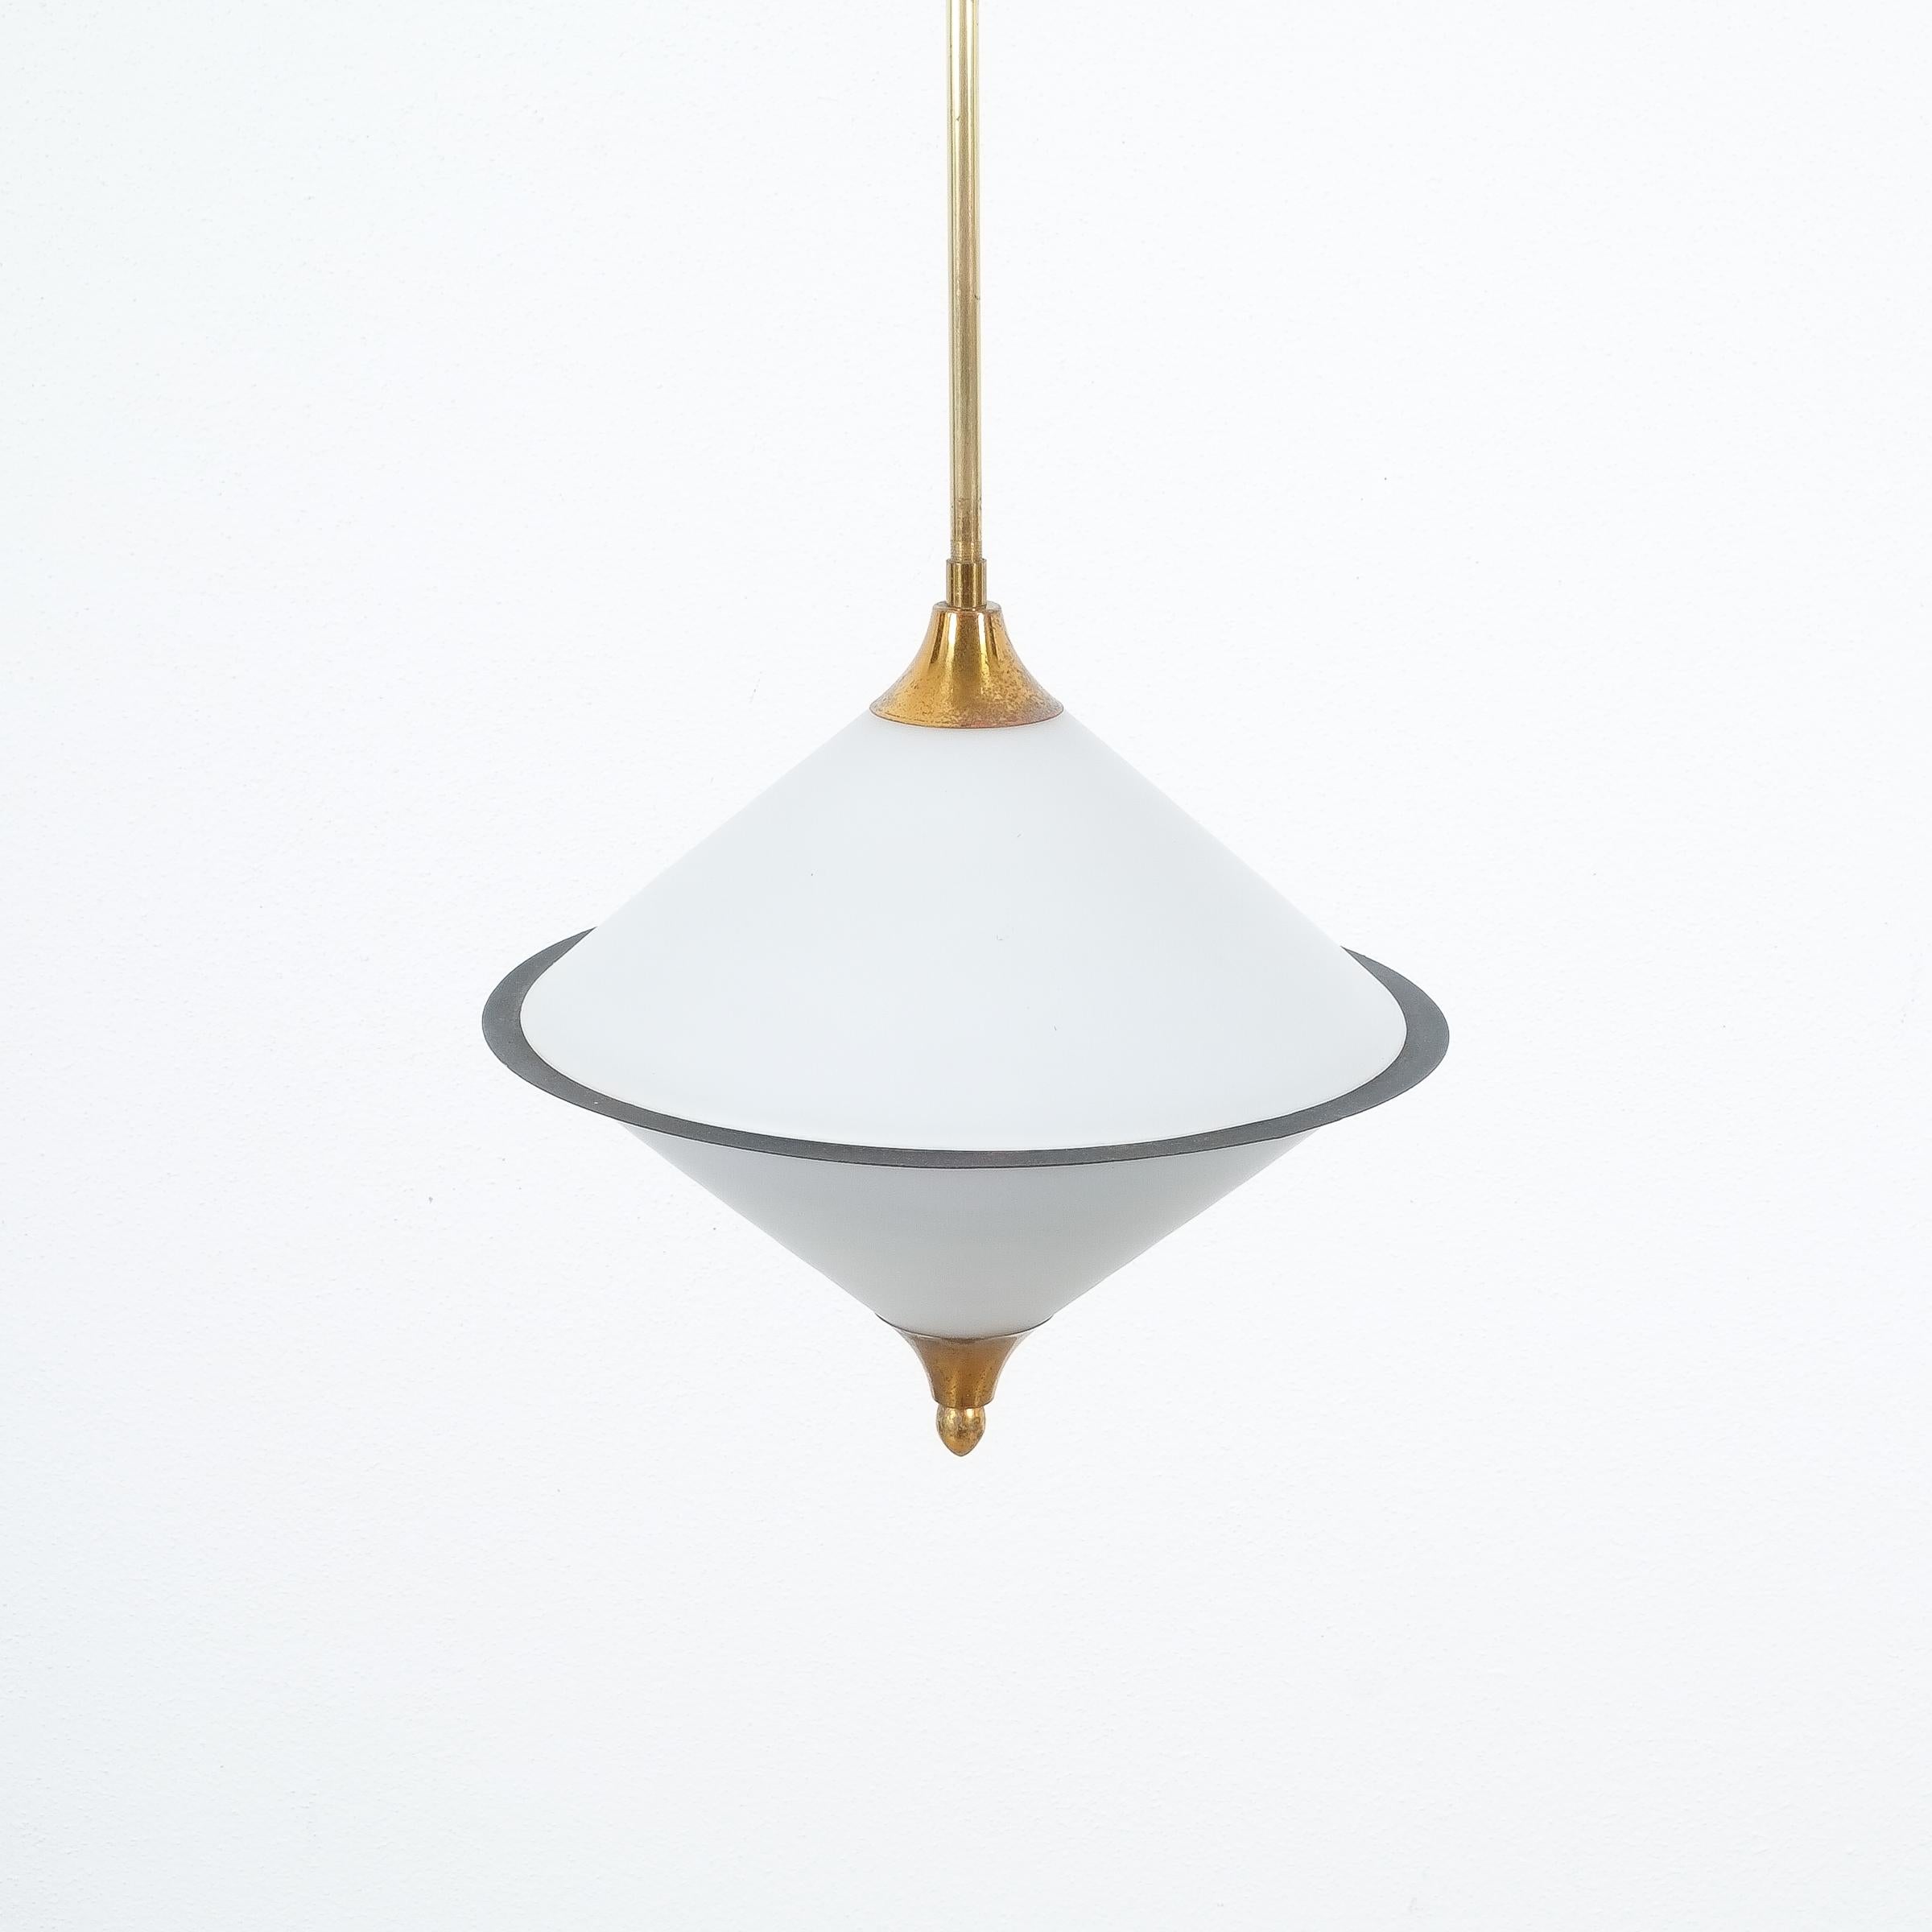 Rare spin top shaped pendant lamp opal glass attributed to Lelli, circa 1950

Beautiful opal glass light, circa 1950, Italy featuring a double conical glass shade made from two parts, divided by a thin blackened steel disc. It's in good condition